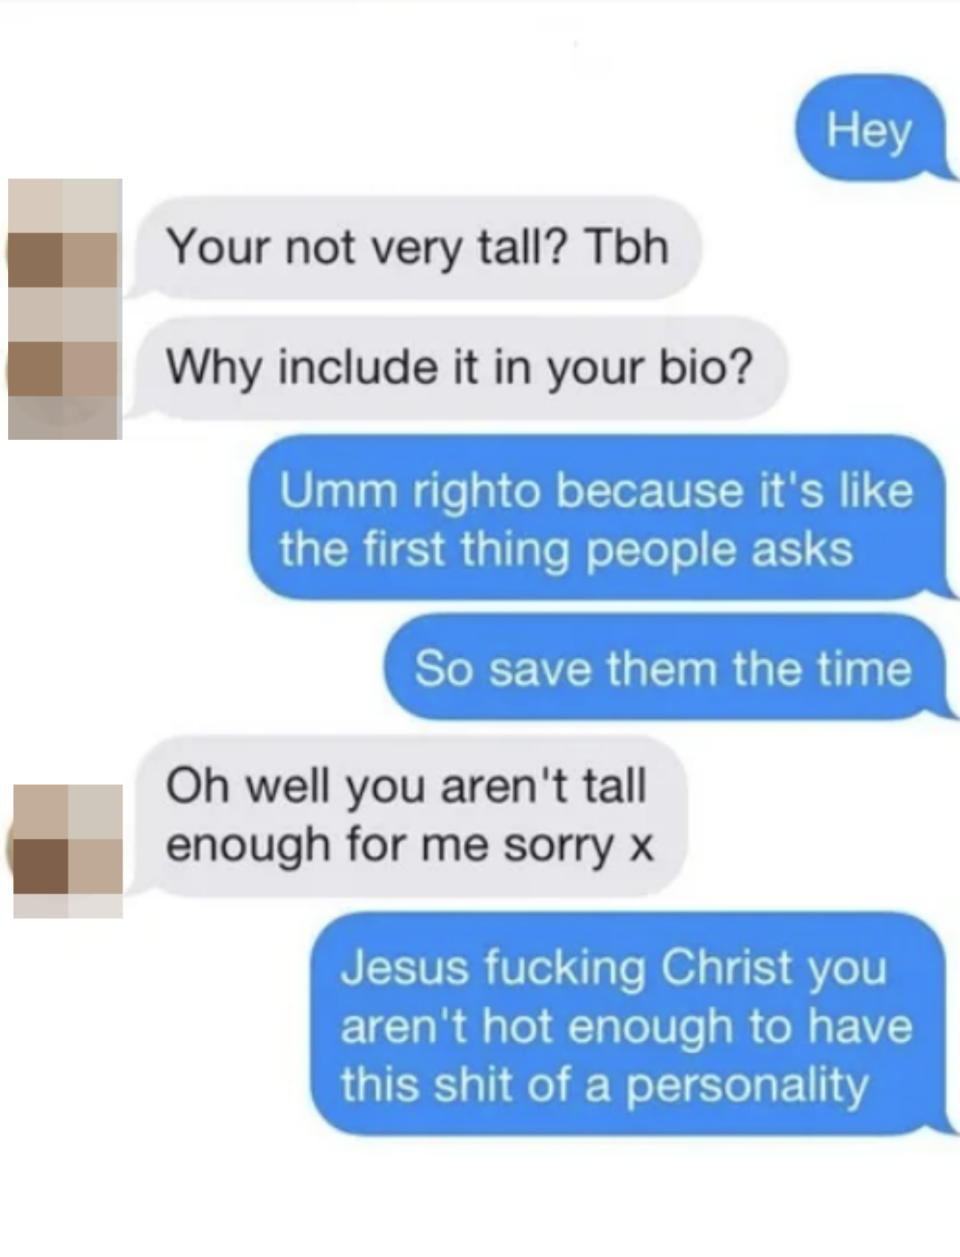 woman asks person why they included their height if they're not that tall and then says they're not tall enough